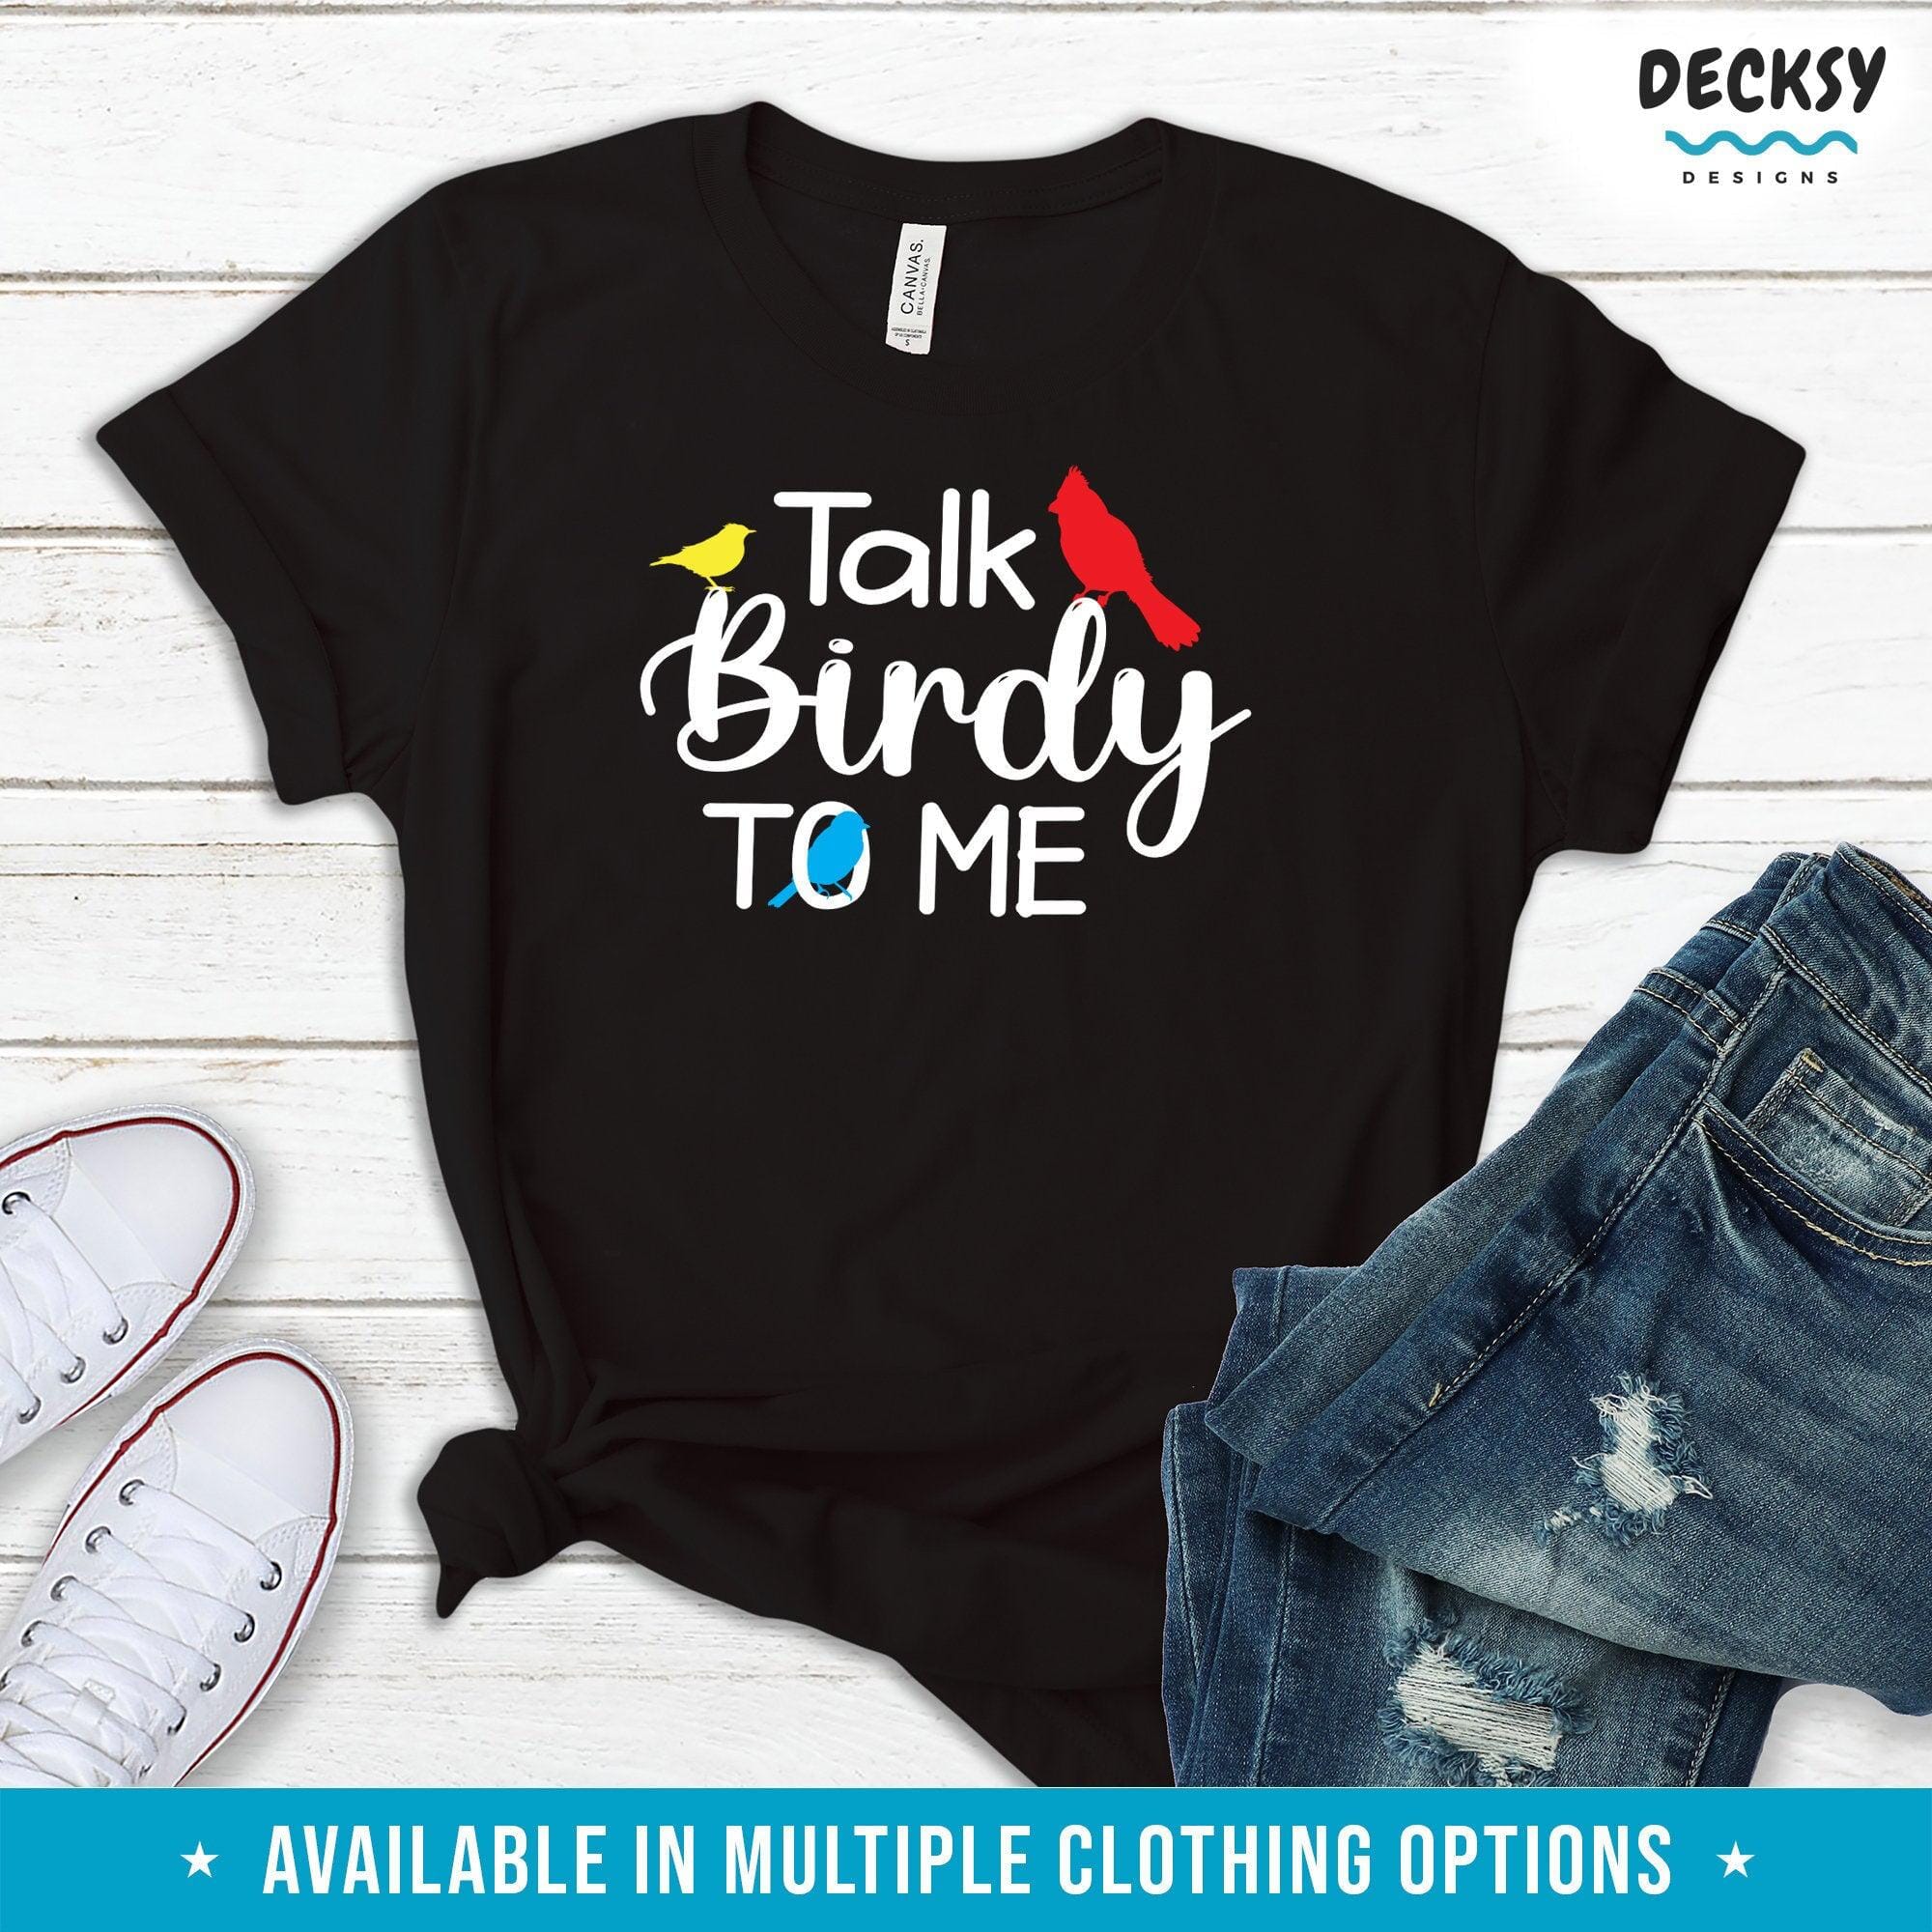 Bird Lover Shirt, Ornithologist Gift-Clothing:Gender-Neutral Adult Clothing:Tops & Tees:T-shirts:Graphic Tees-DecksyDesigns